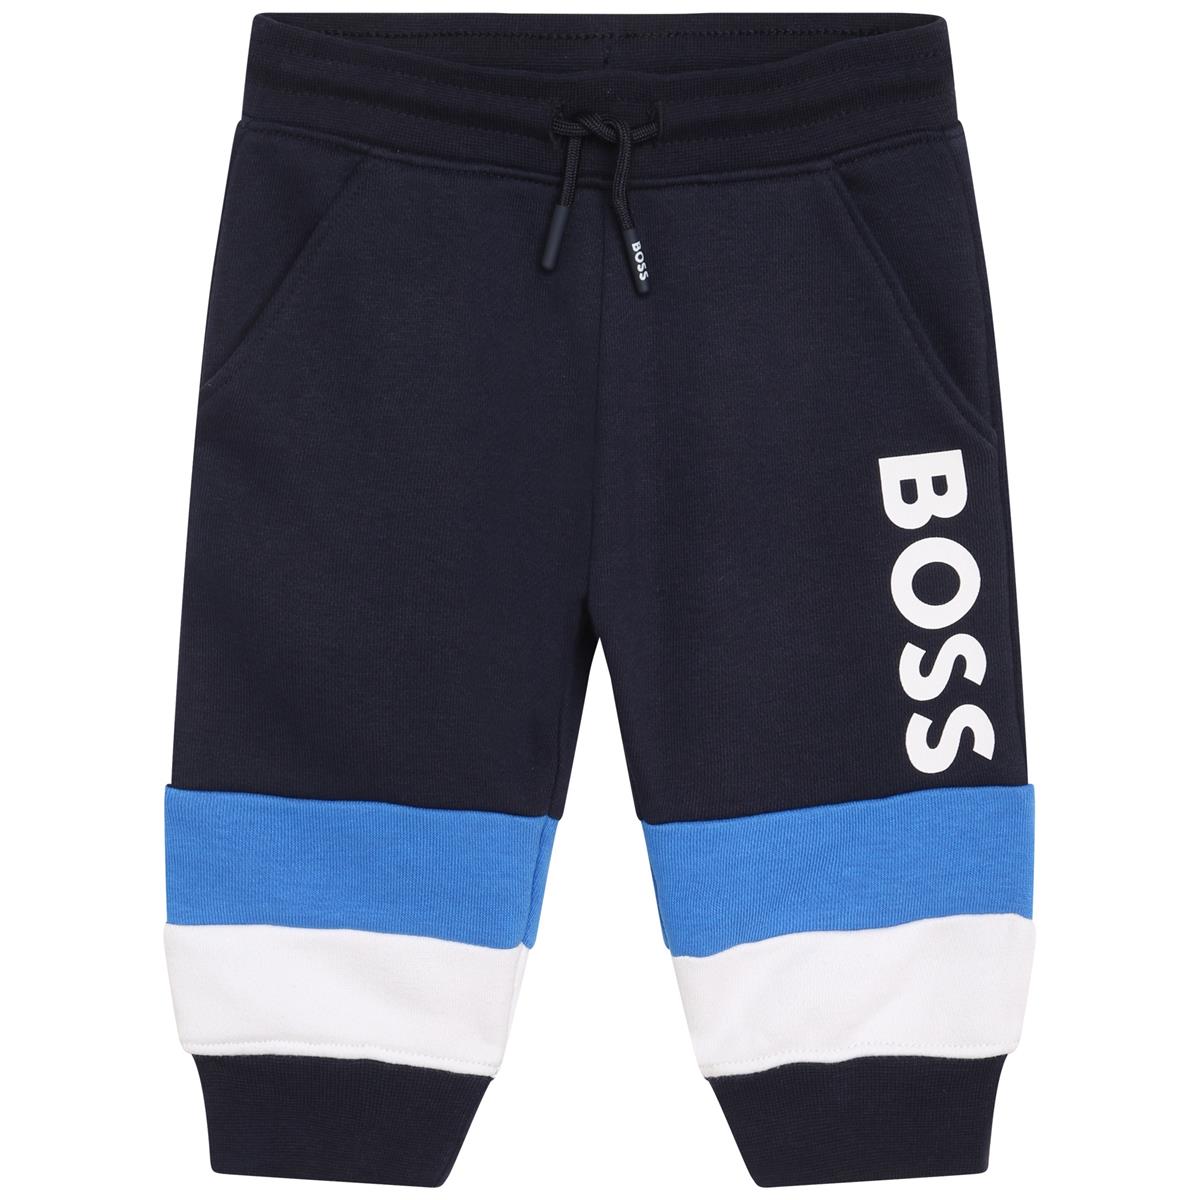 Baby Boys Blue Cotton Trousers